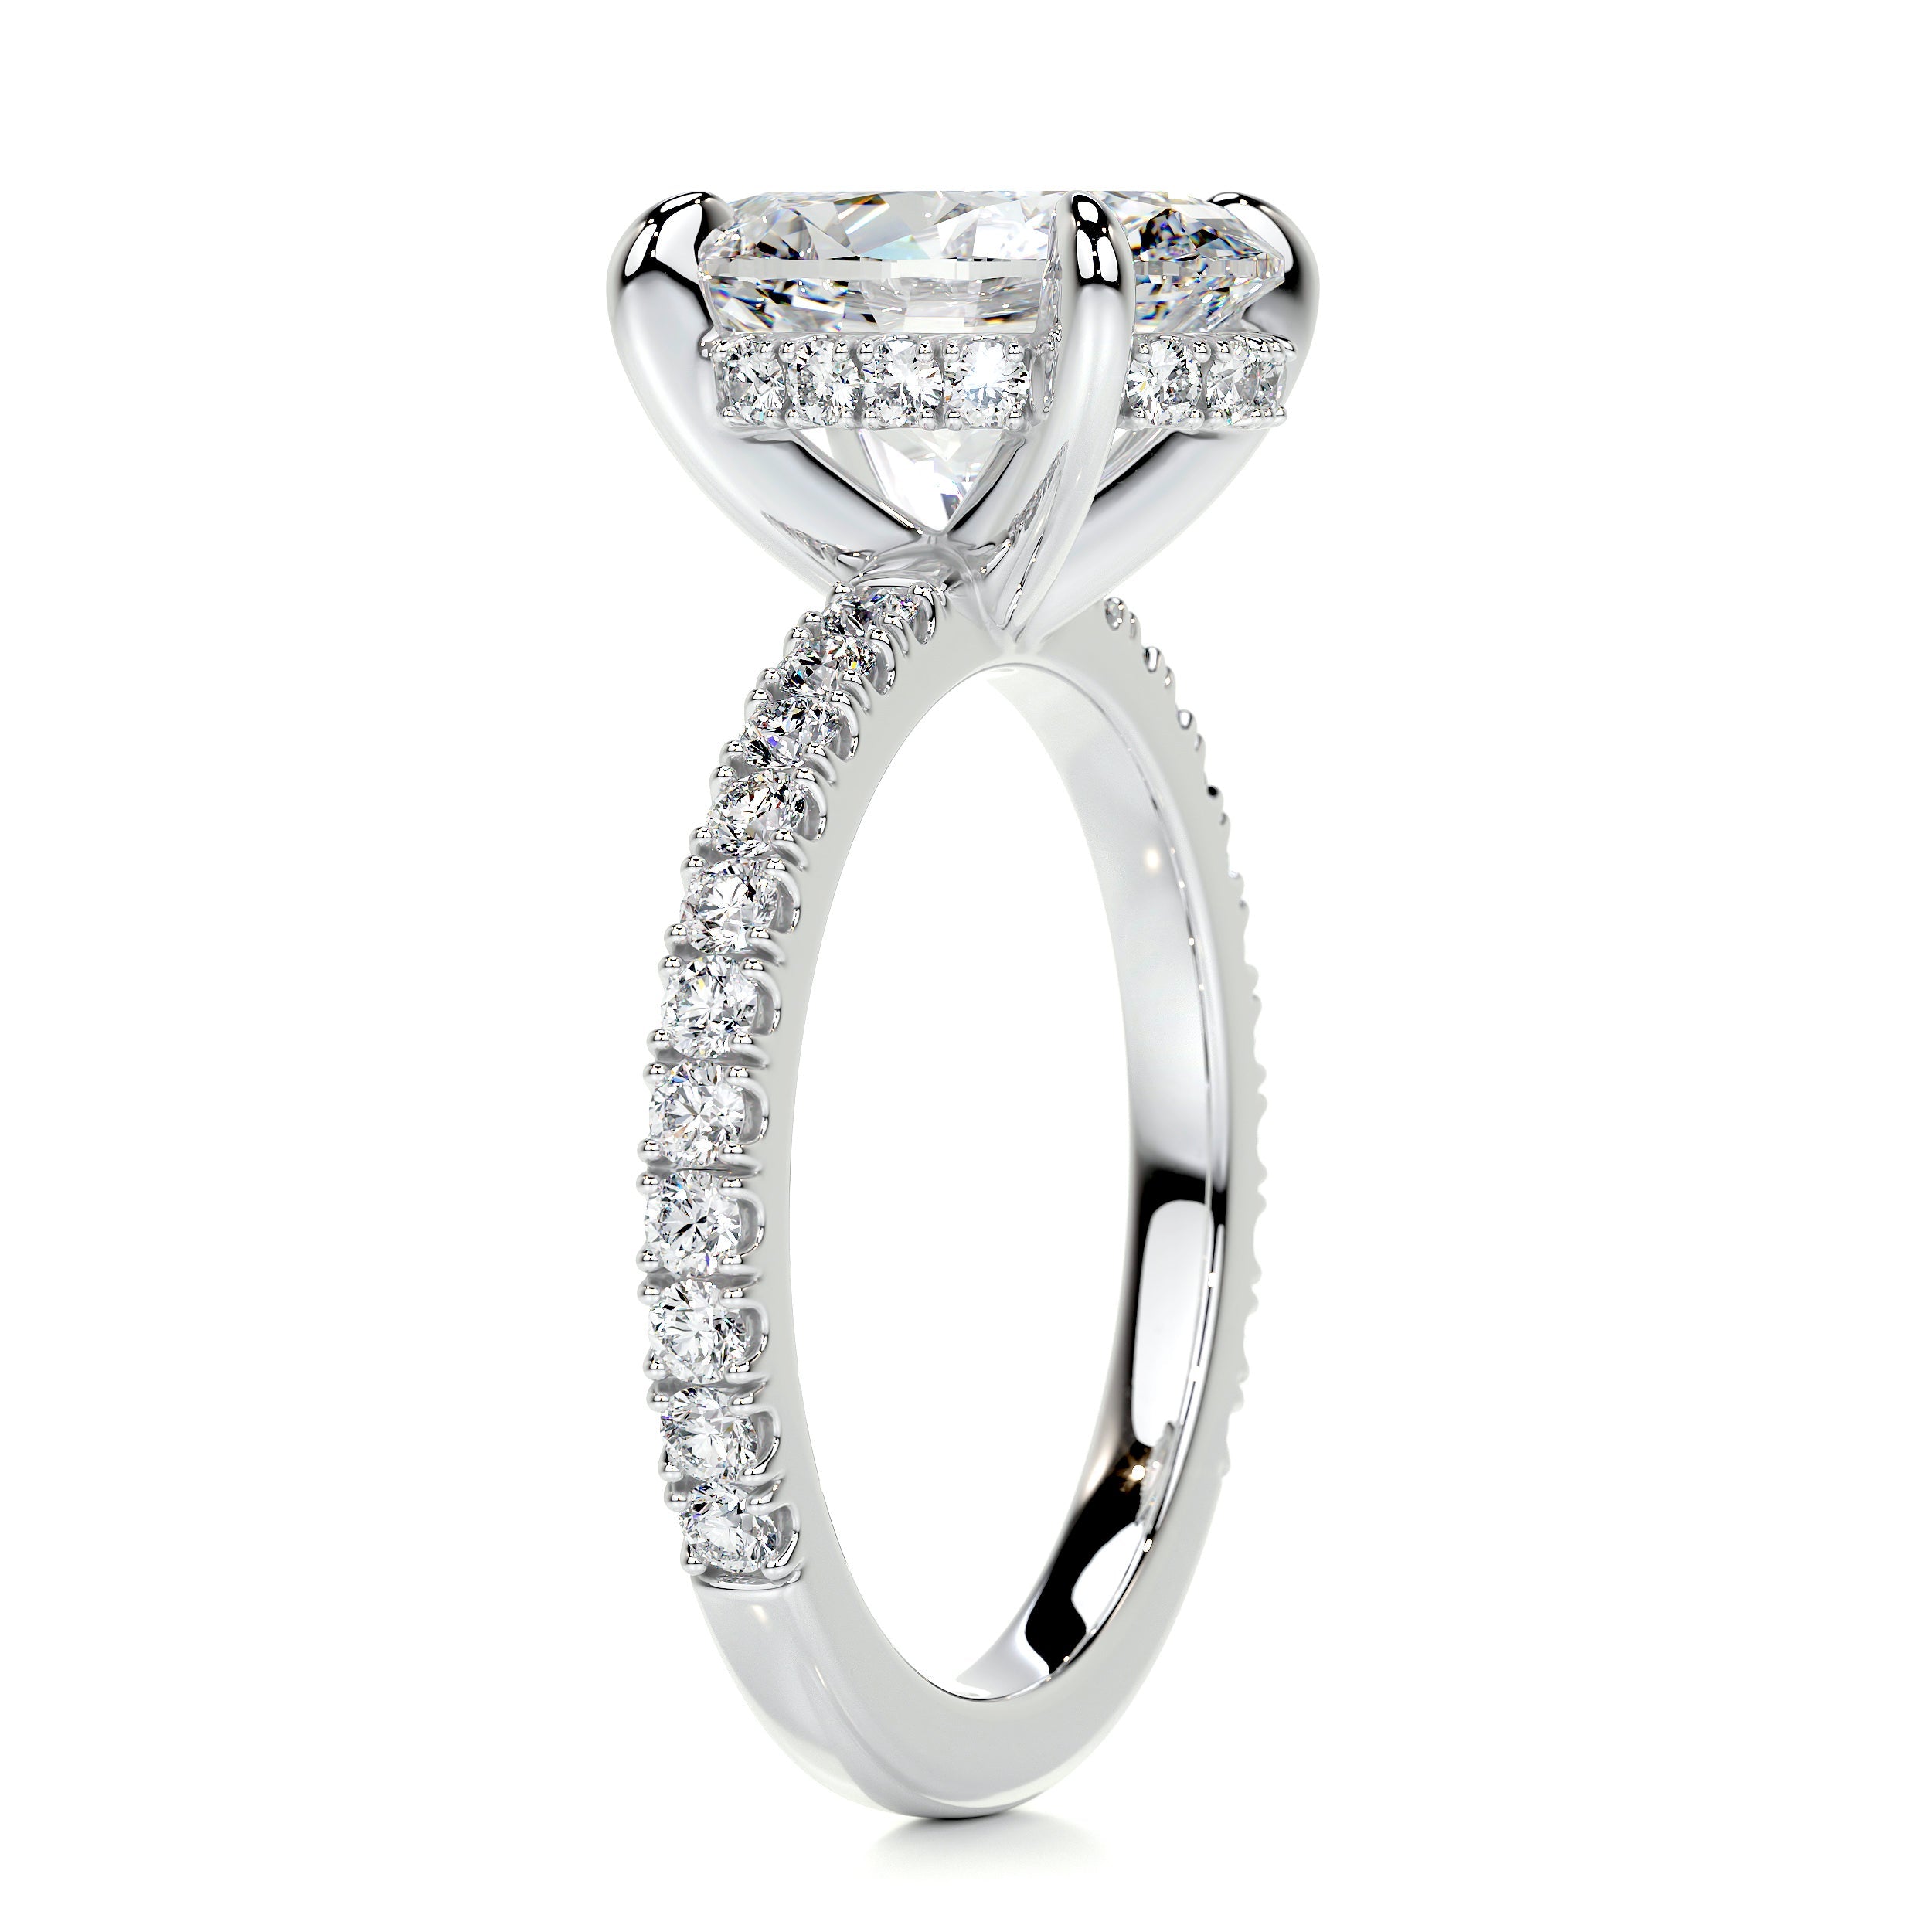 Lucy Diamond Engagement Ring -14K White Gold (RTS)